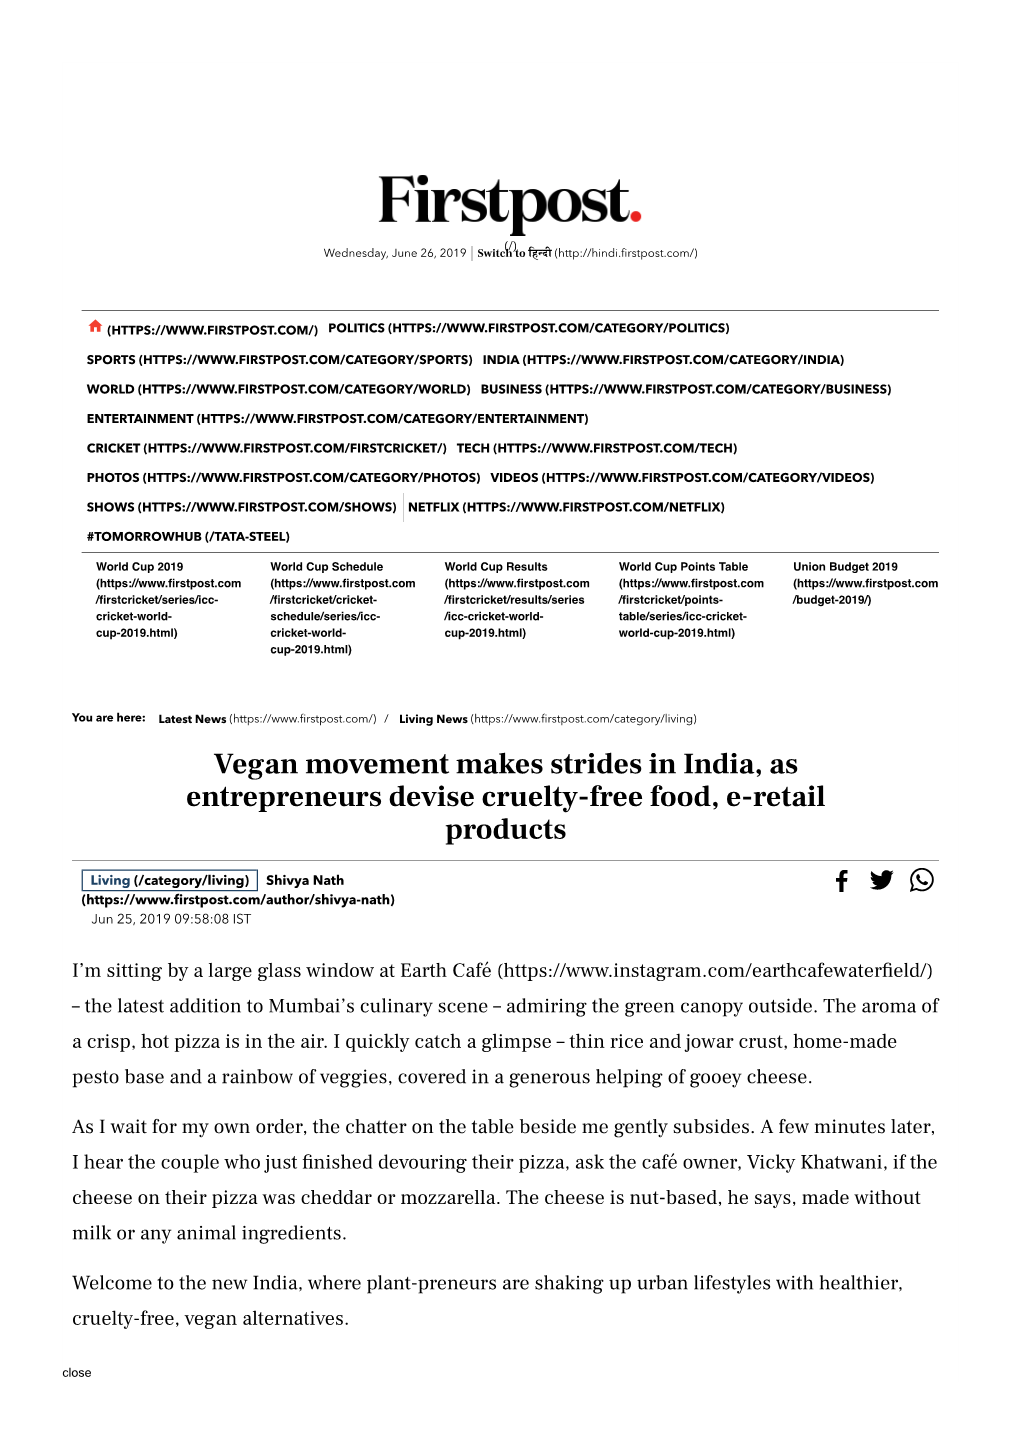 Vegan Movement Makes Strides in India, As Entrepreneurs Devise Cruelty-Free Food, E-Retail Products